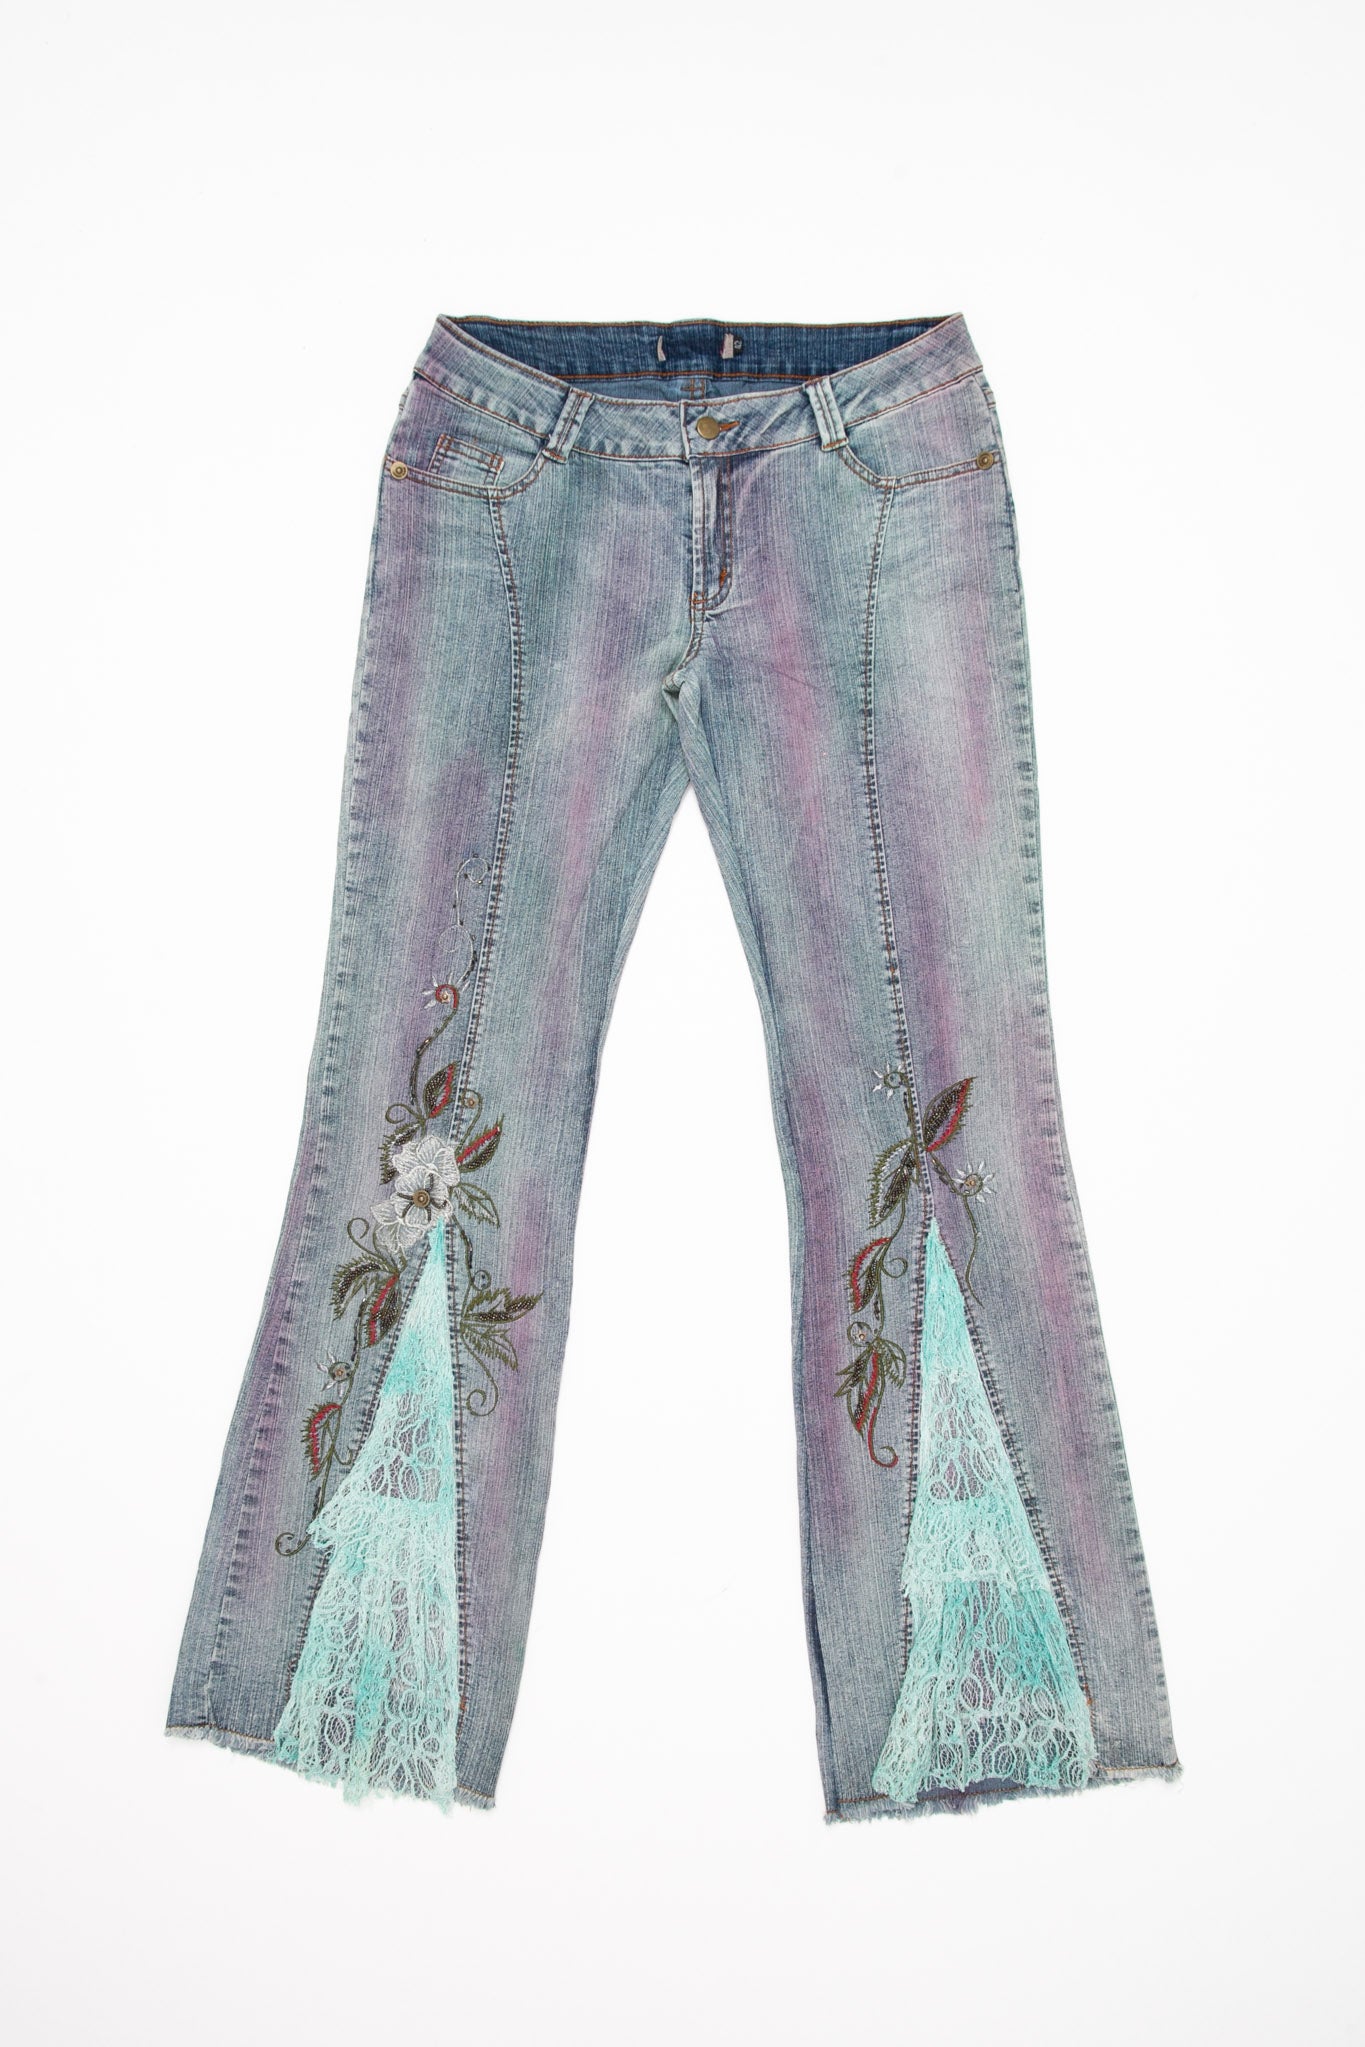 Lace Pink Flower Jeans